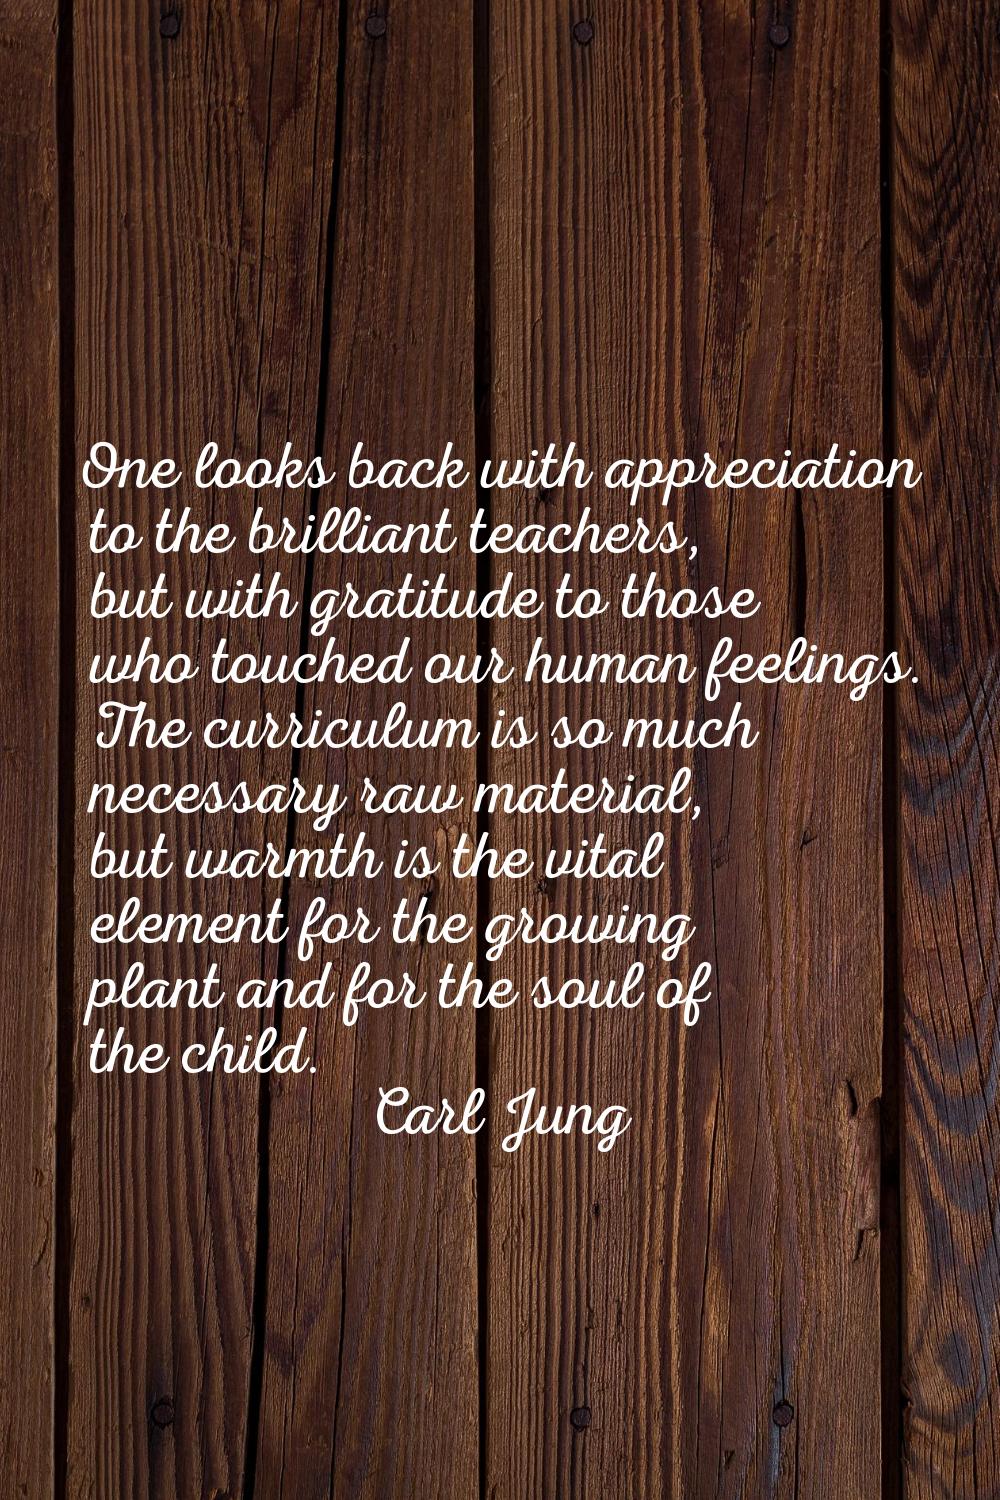 One looks back with appreciation to the brilliant teachers, but with gratitude to those who touched